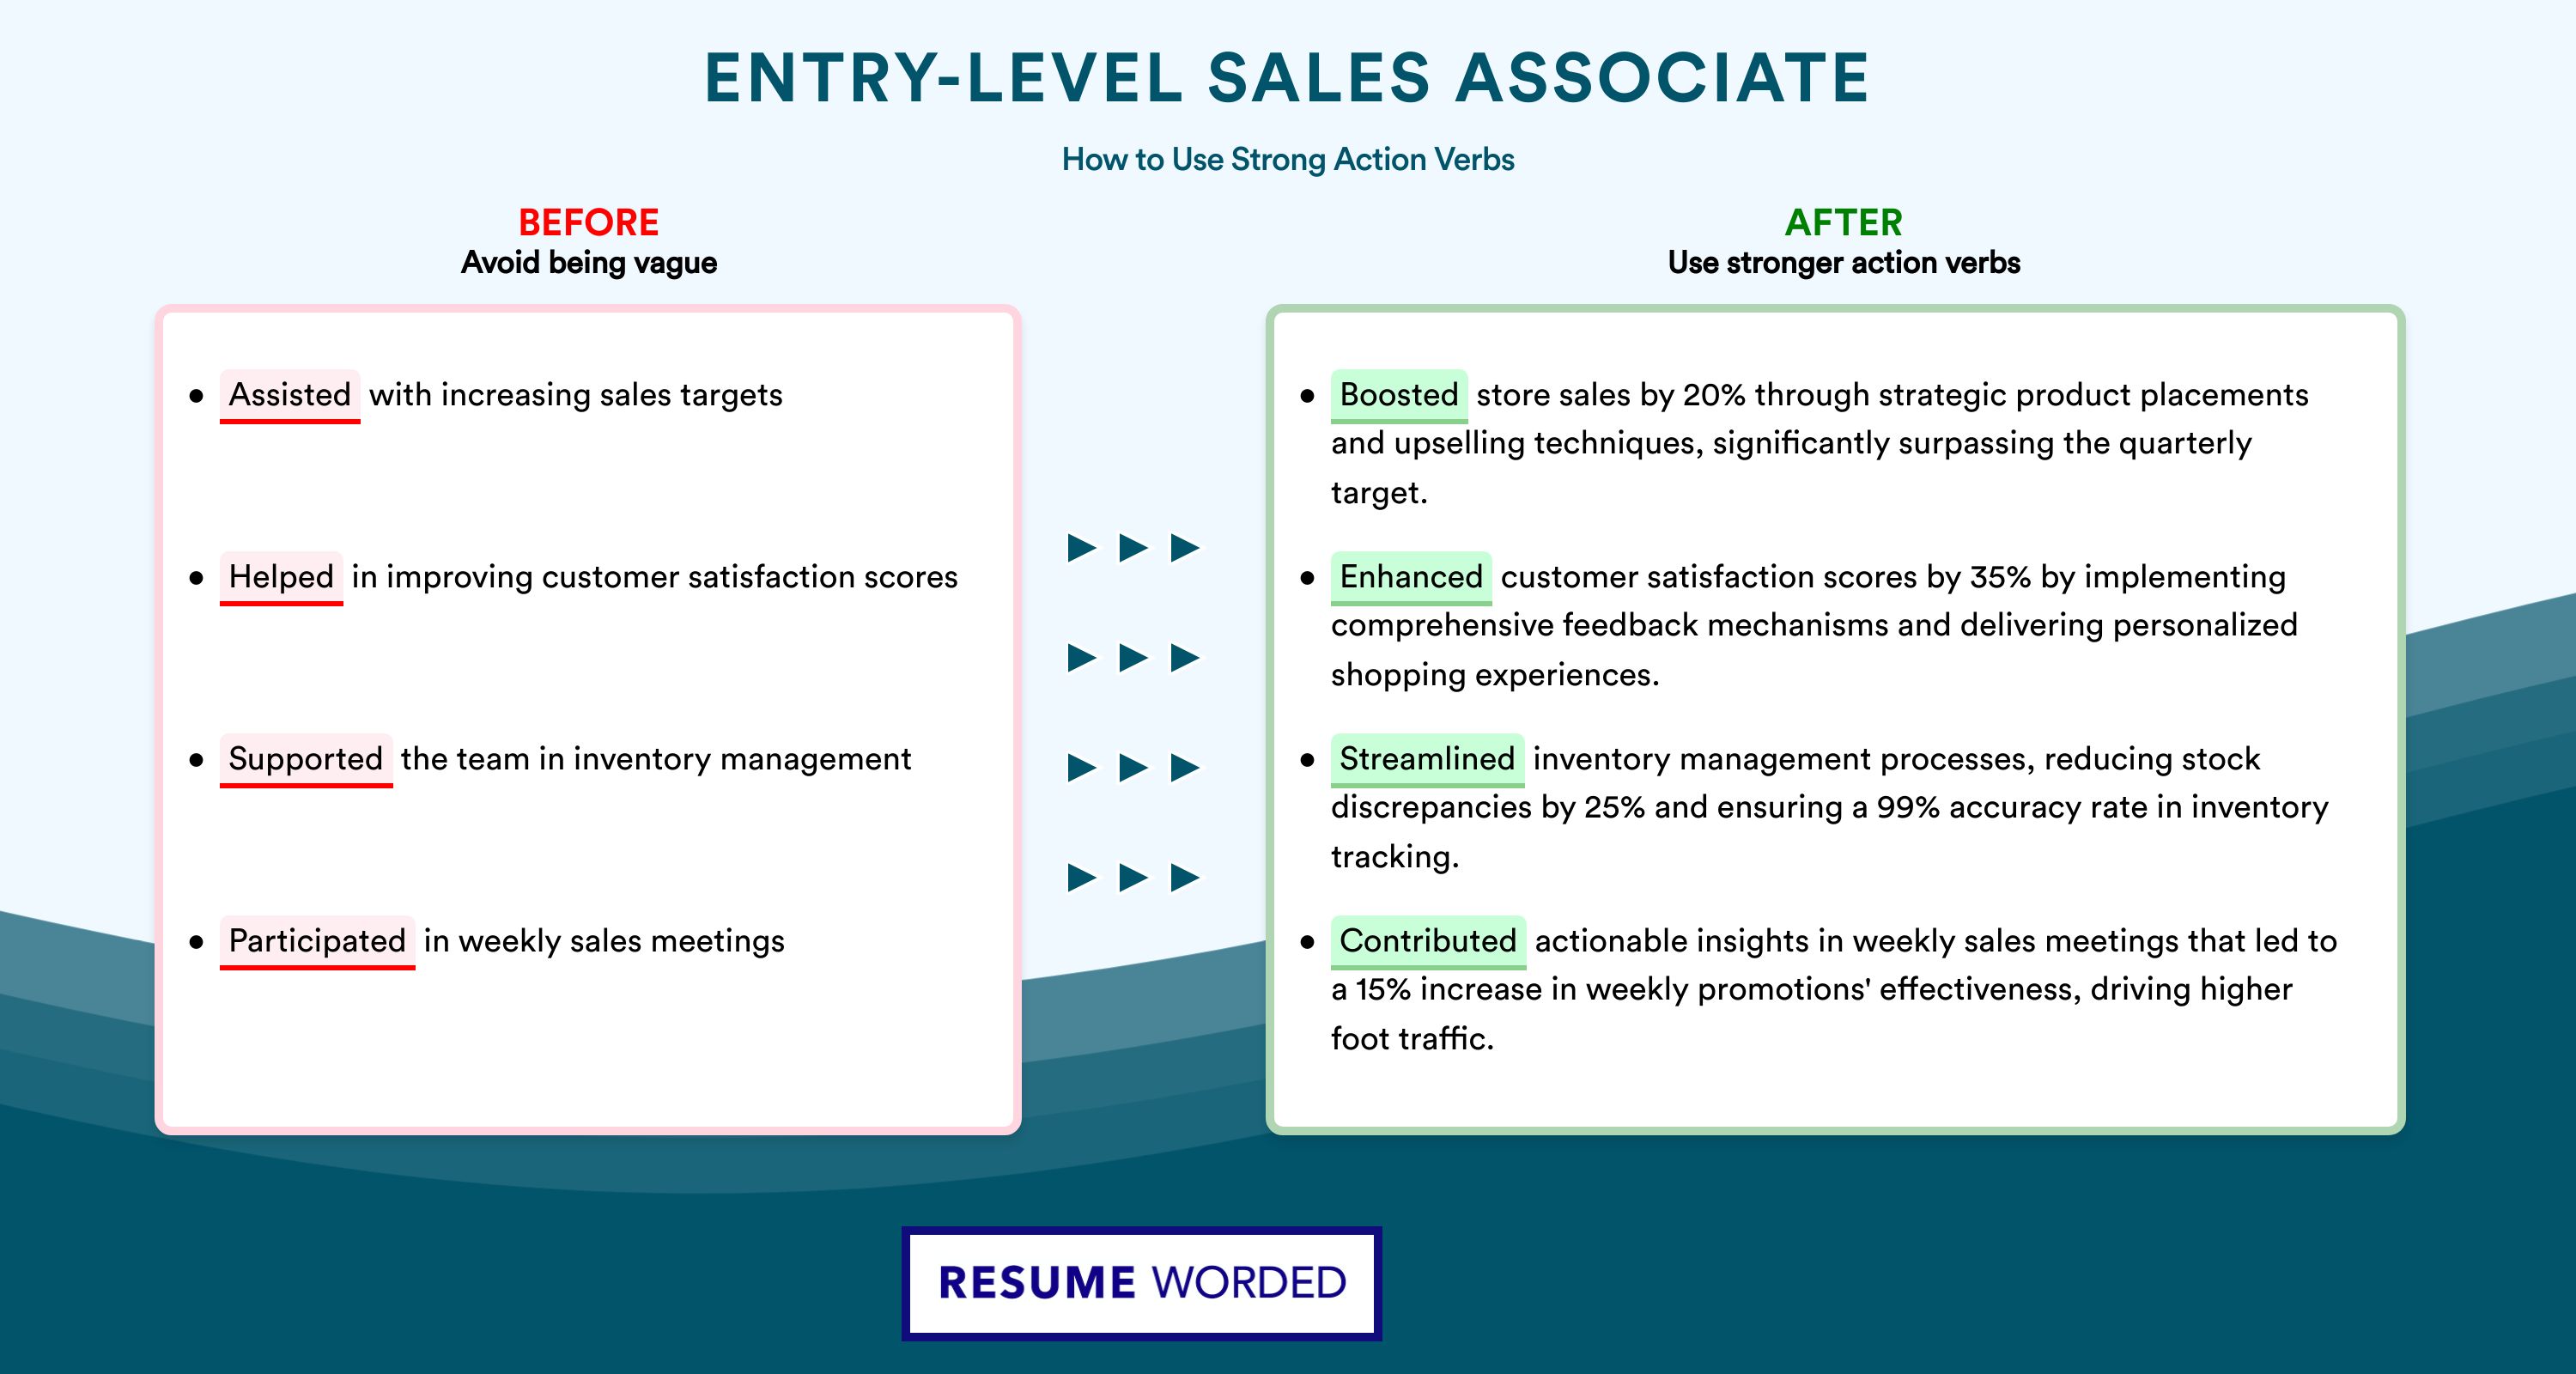 Action Verbs for Entry-Level Sales Associate